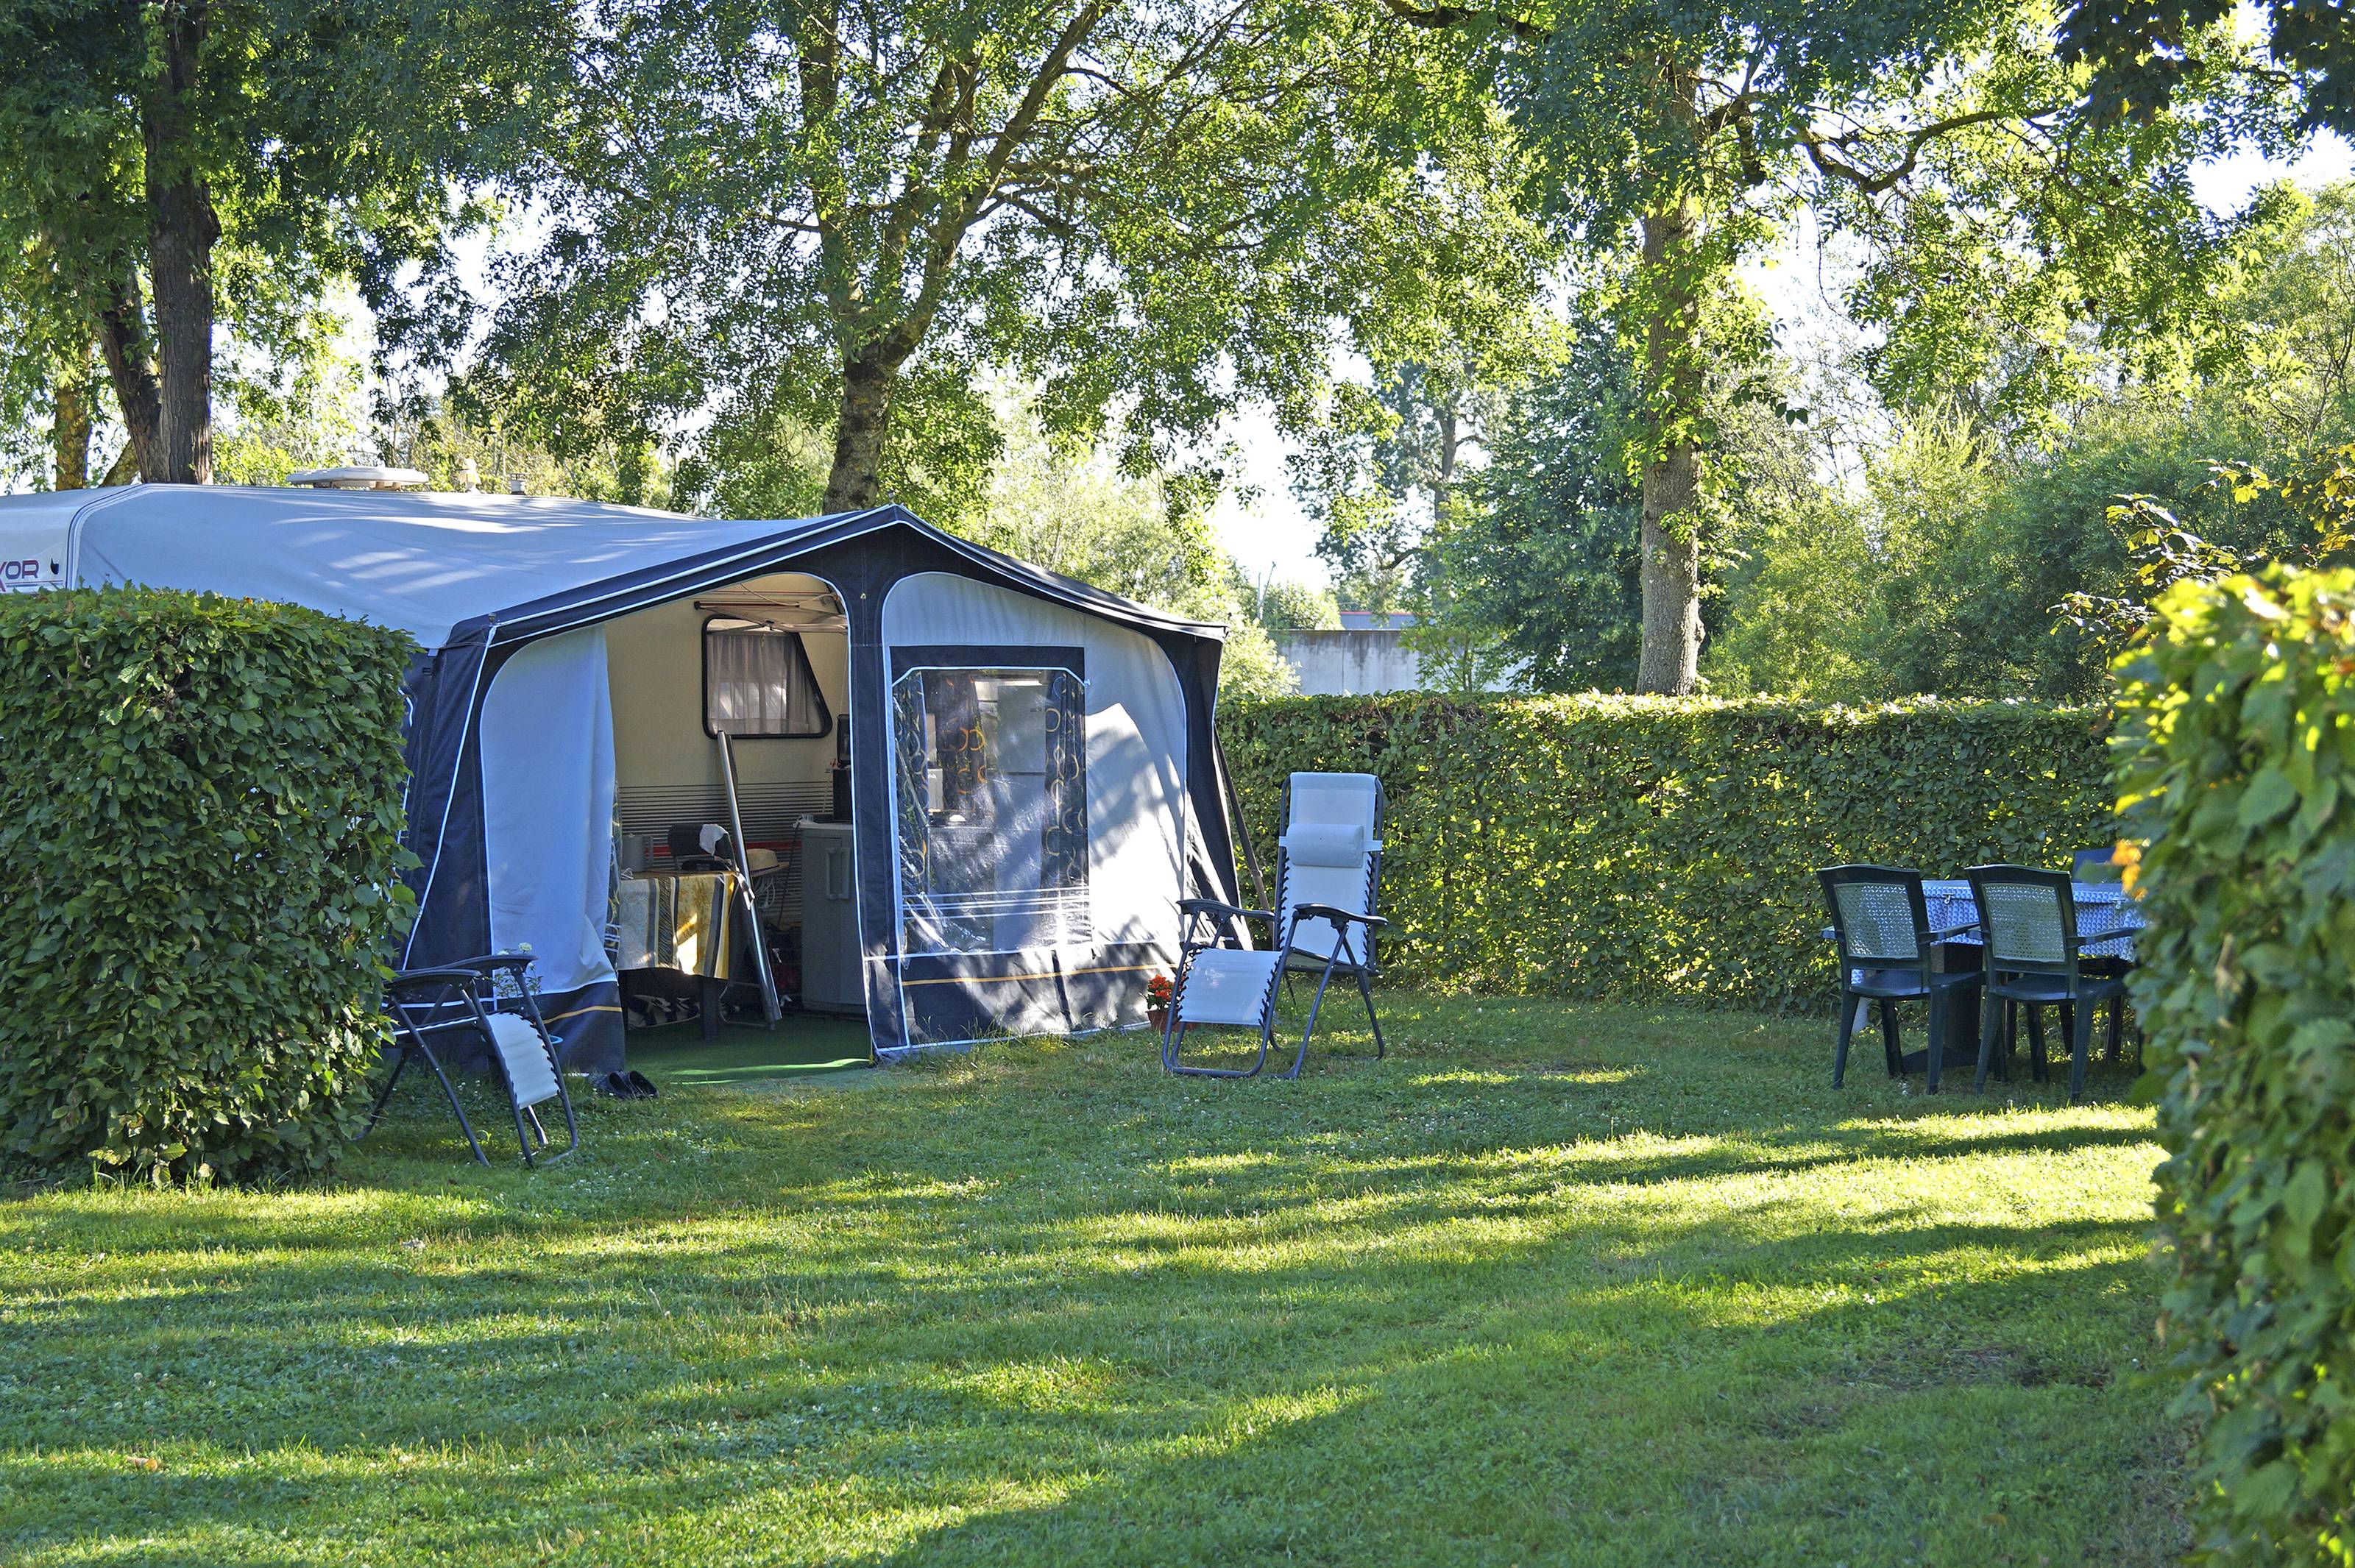 Camping pitch with caravan